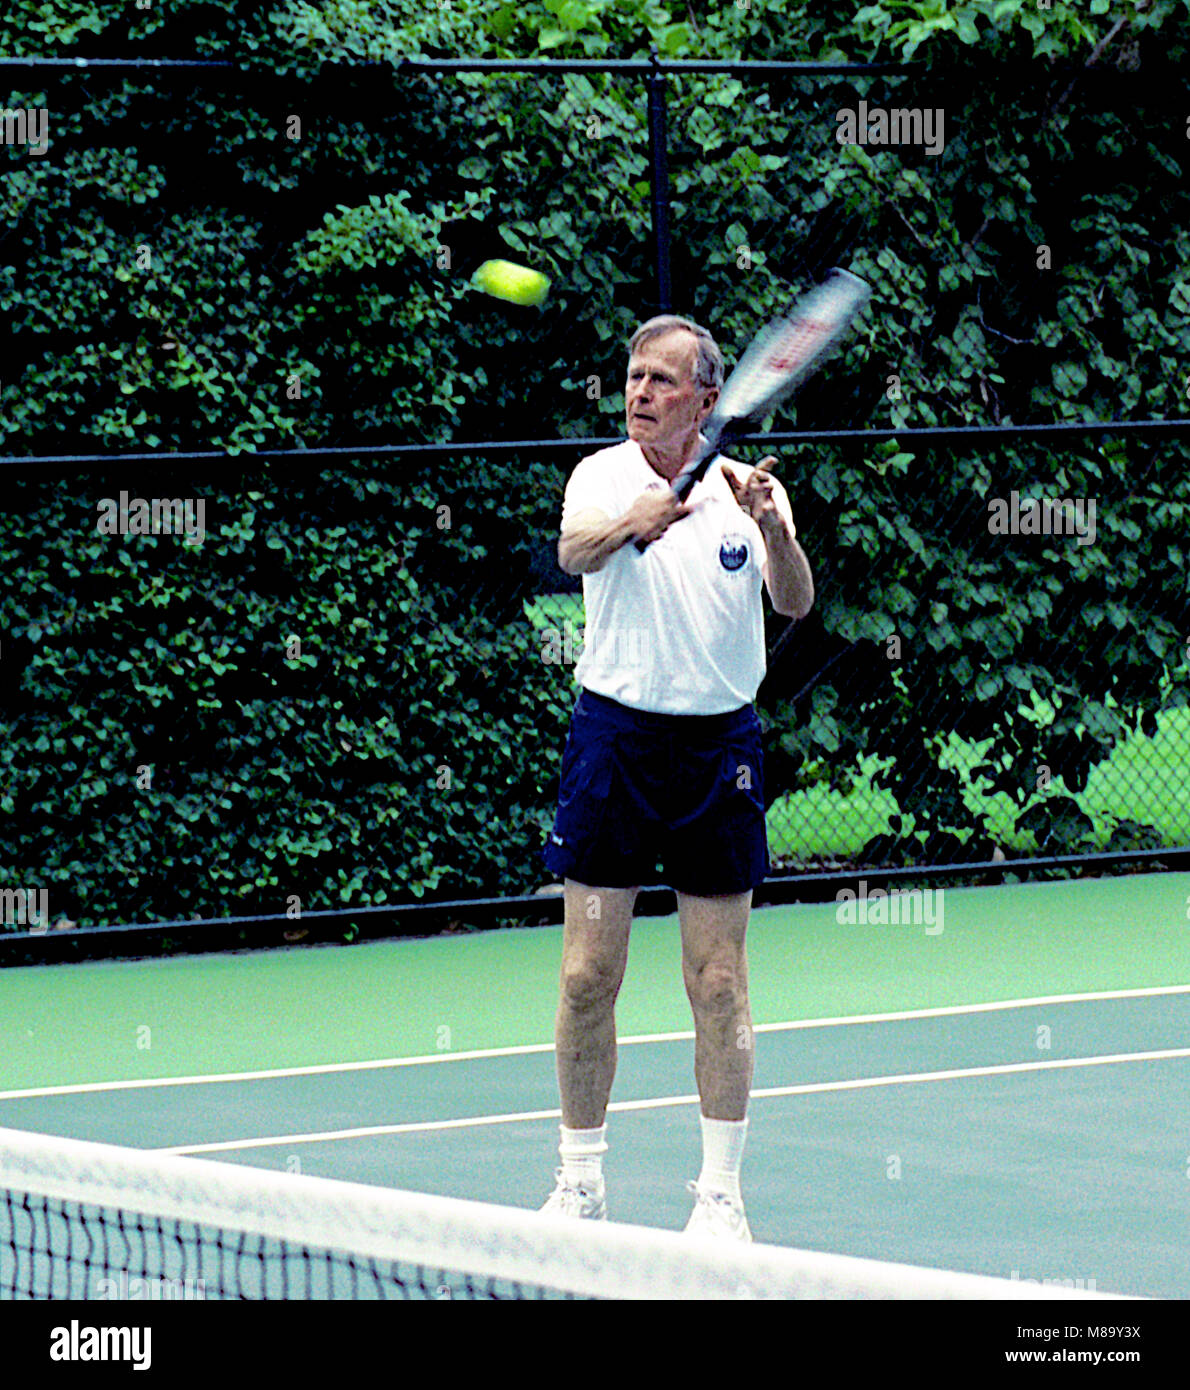 Washington DC. USA, 2nd July, 1991 President George H.W. Bush plays doubles tennis with South Korean President Roh Tae Woo, during President Woo's state visit to the White House.  Washington DC. USA, July 2, 1991 President George H.W. Bush plays doubles tennis with South Korean President Roh Tae Woo, during President Woo's state visit to the White House. Credit: Mark Reinstein/MediaPunch Stock Photo